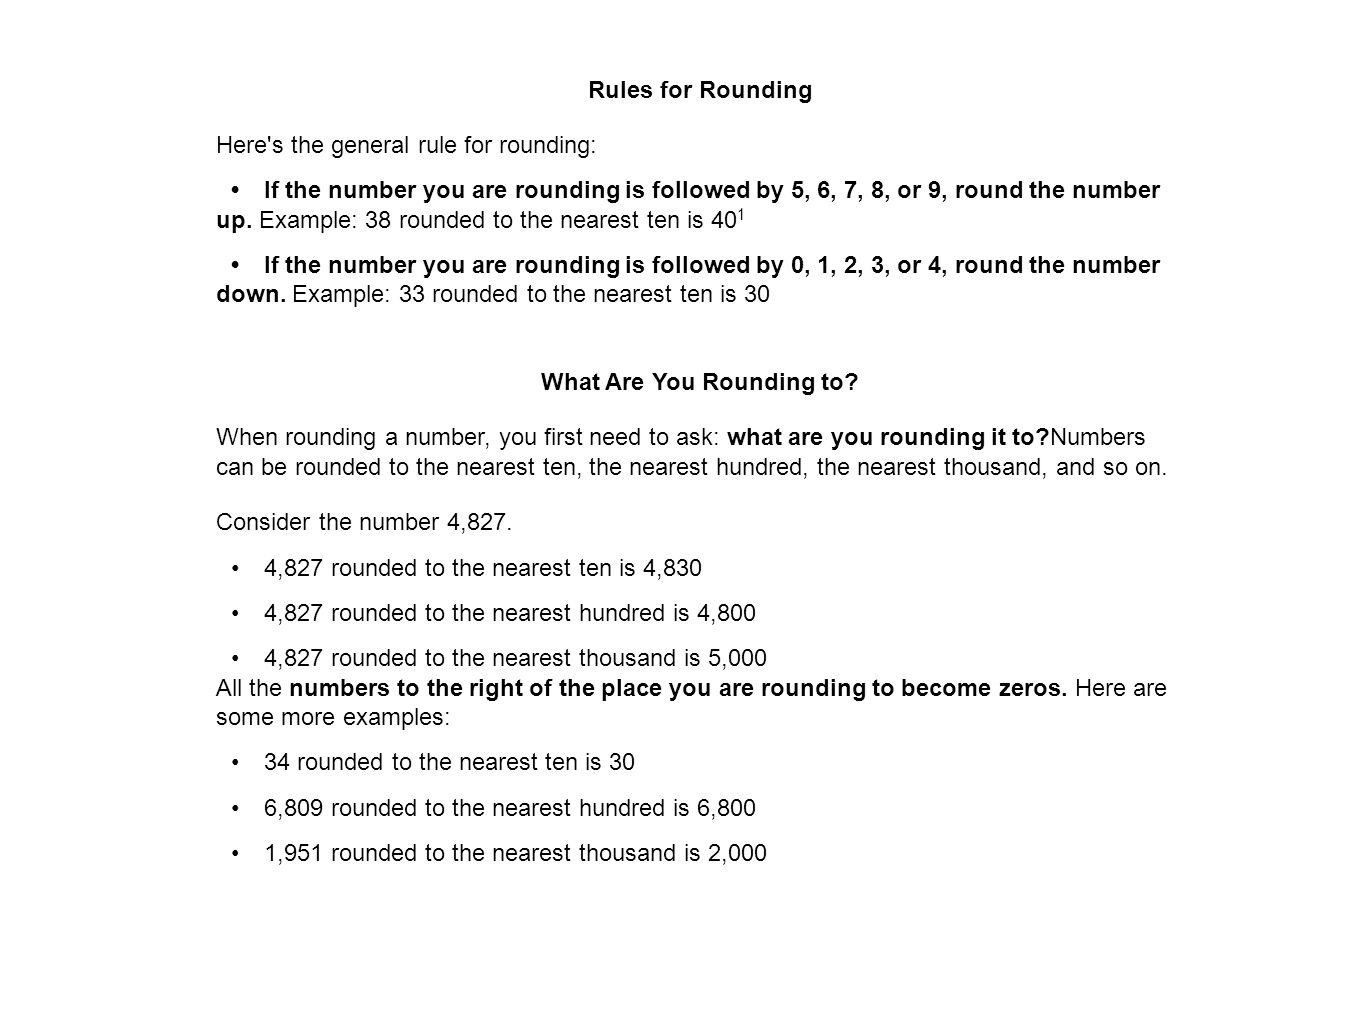 Rules for Rounding Here s the general rule for rounding: If the number you are rounding is followed by 5, 6, 7, 8, or 9, round the number up.